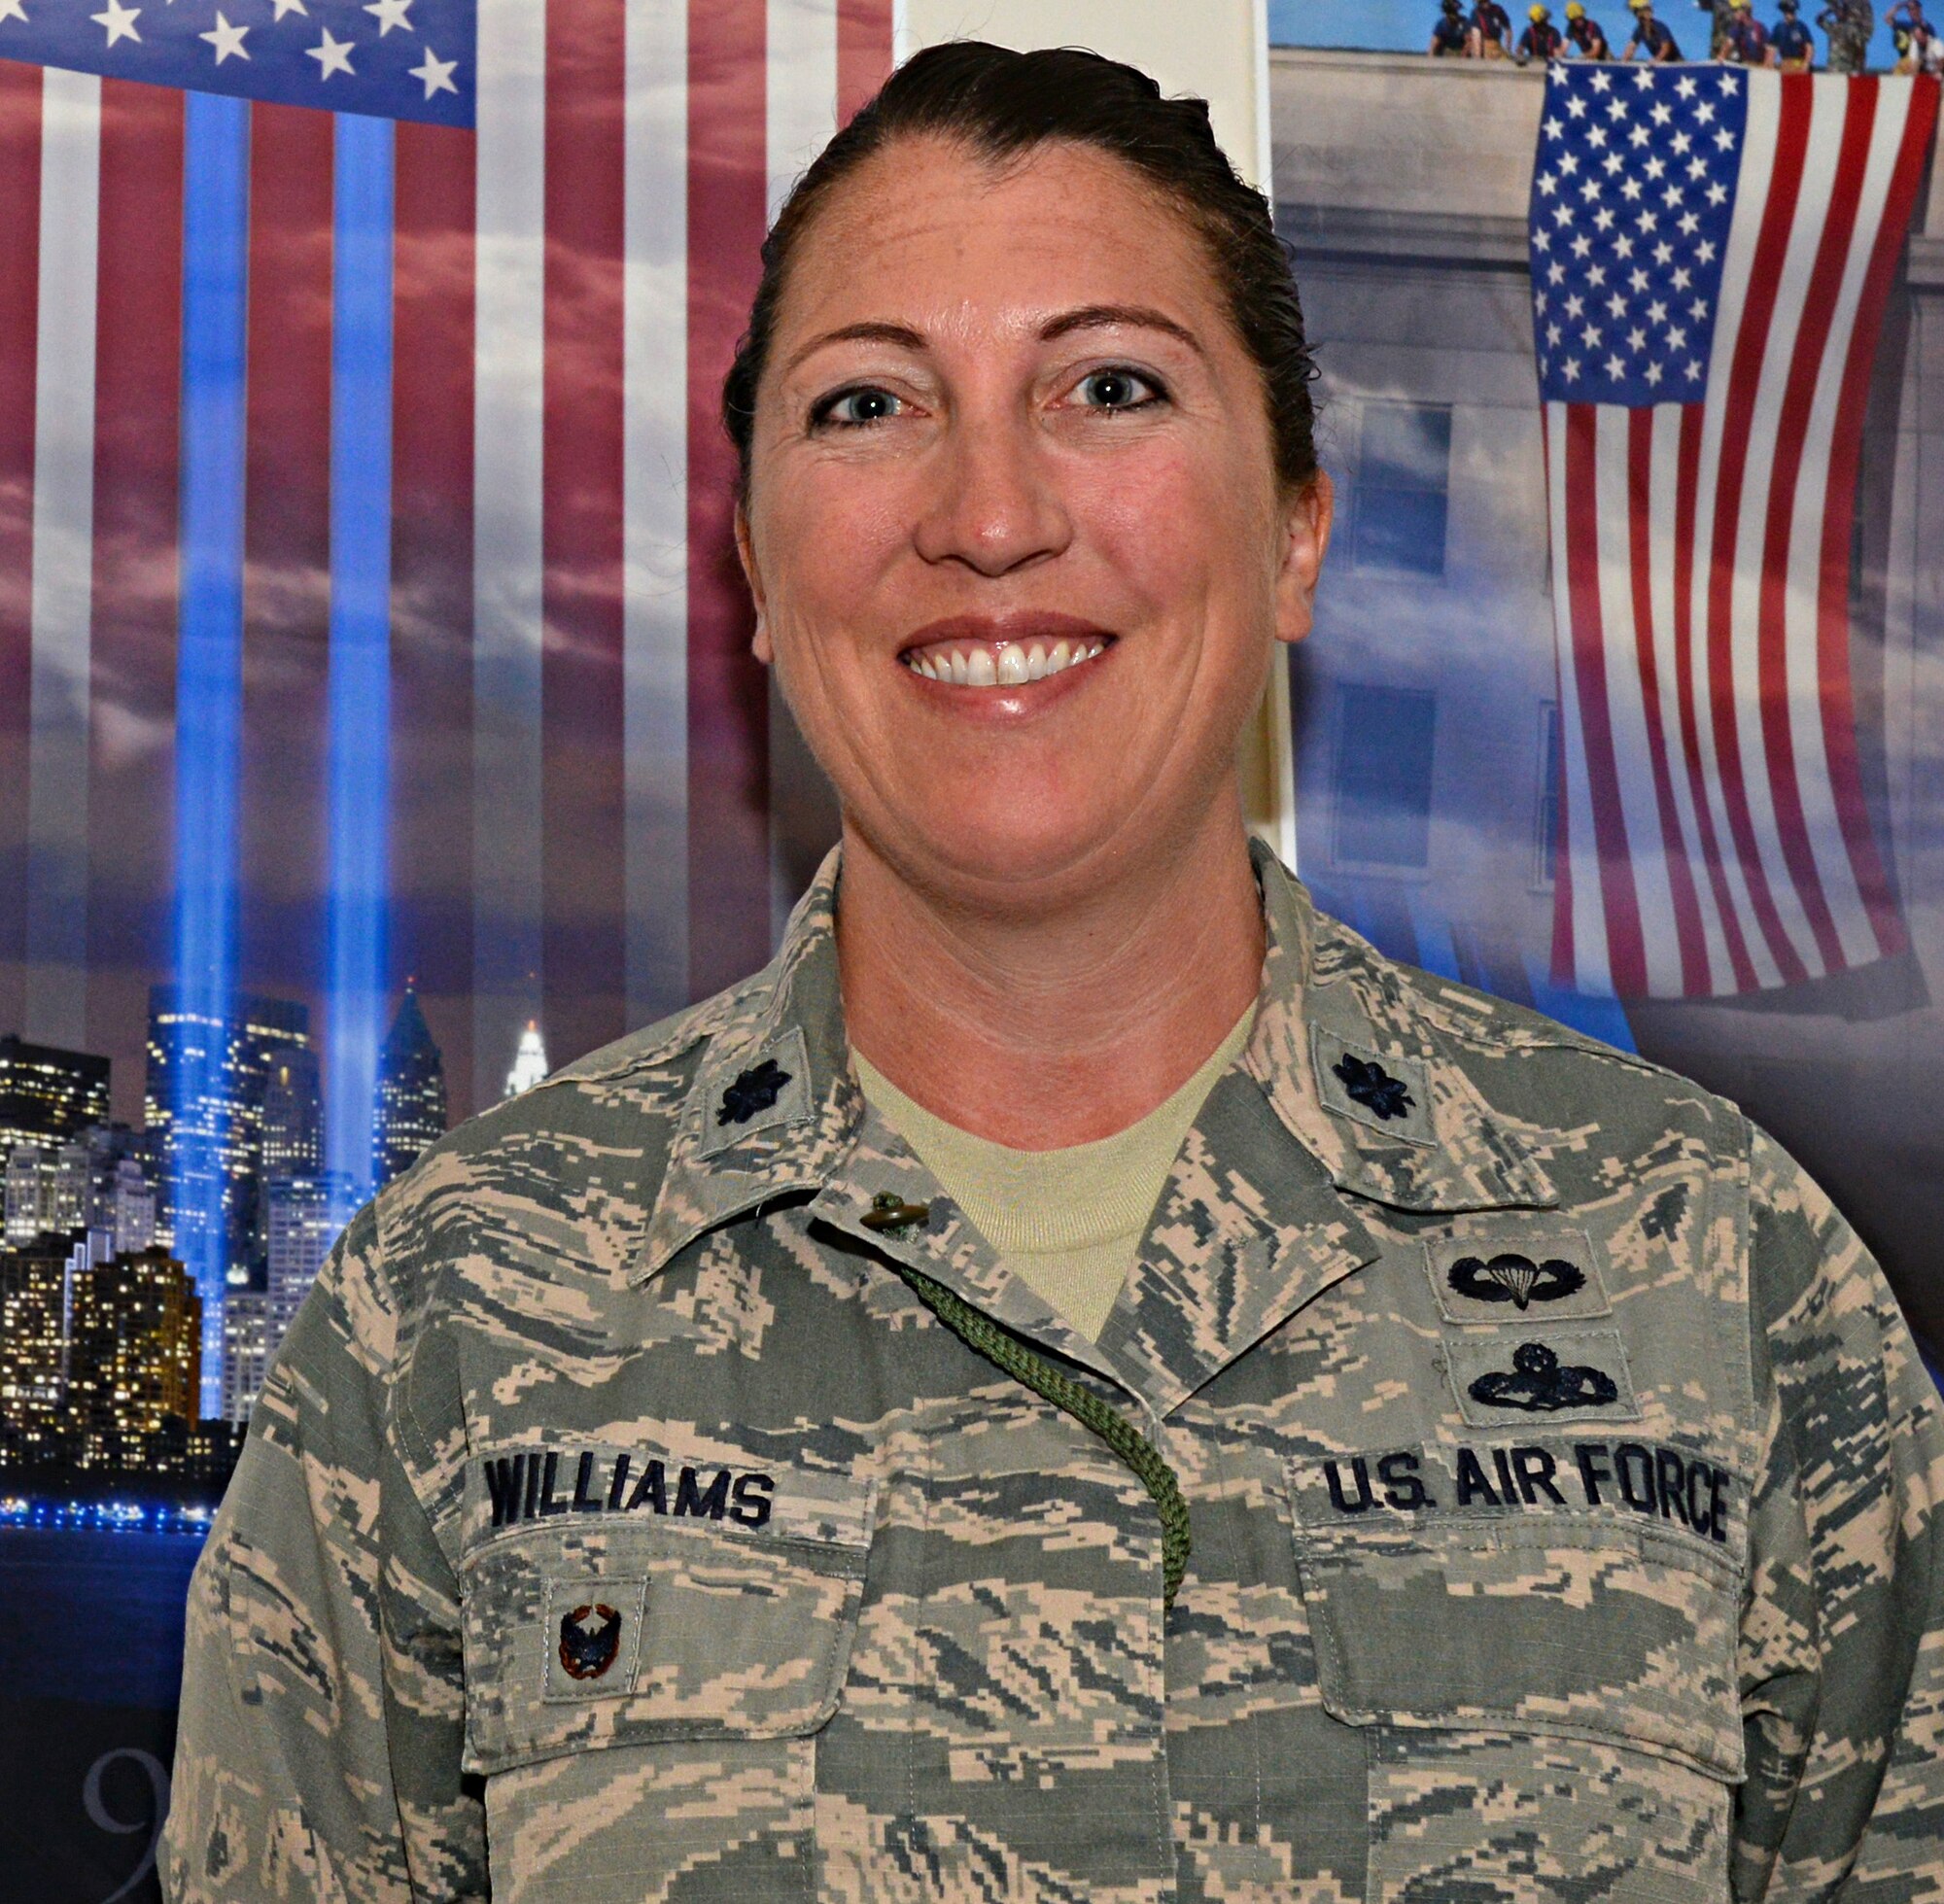 Lt. Col. Sarah Williams, 9th Maintenance Group deputy commander, poses for a photo May 11, 2015, at Beale Air Force Base, Calif. (U.S. Air Force photo by Airman 1st Class Ramon A. Adelan/Released)